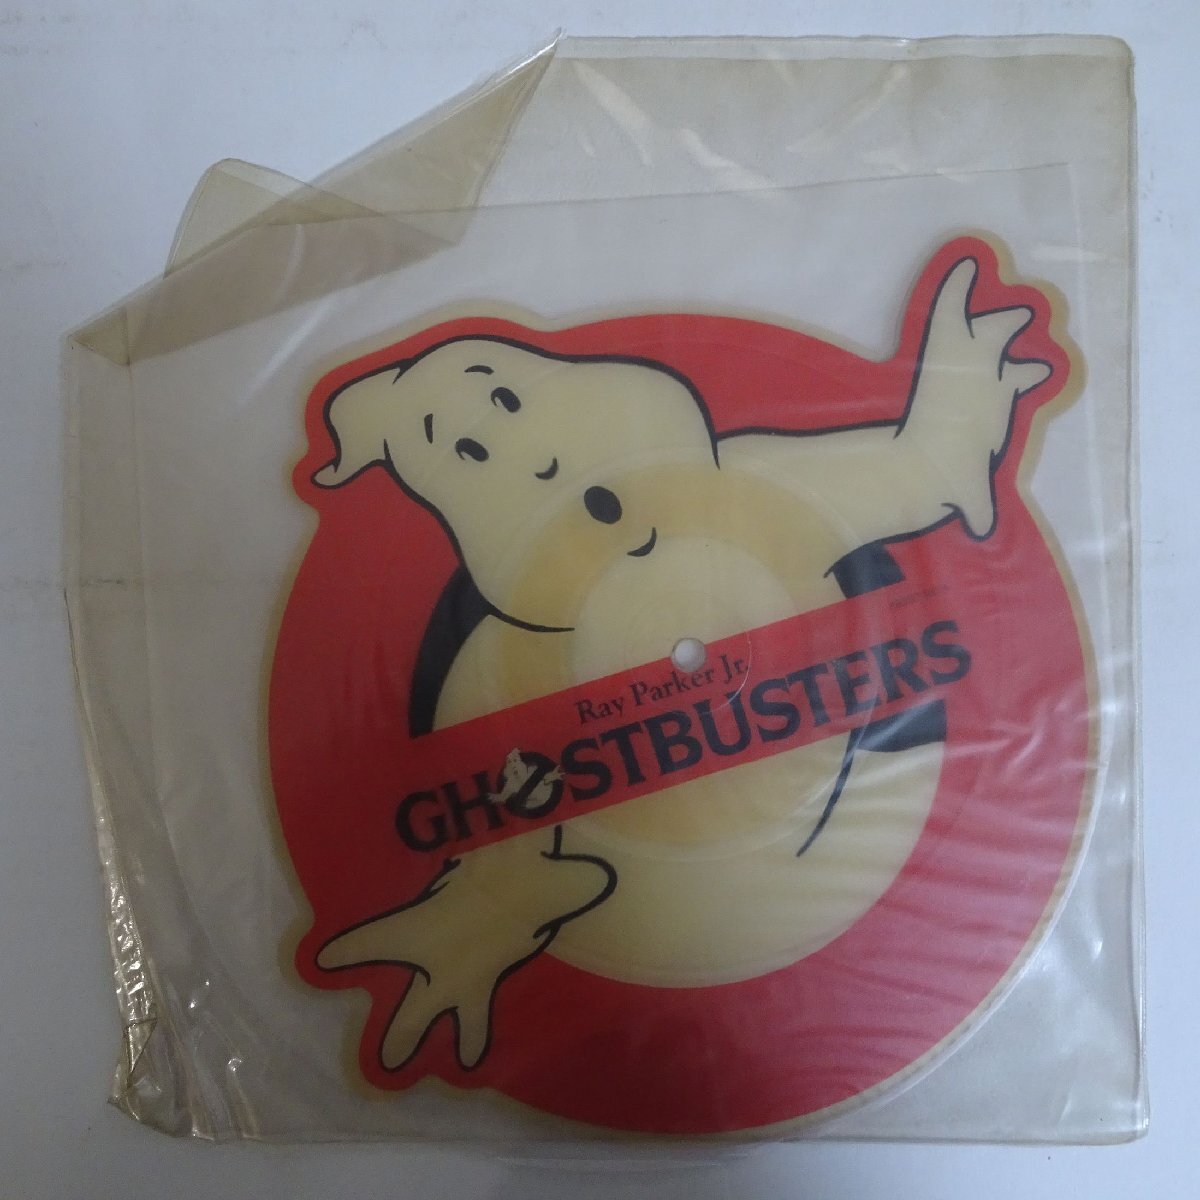 14030427;【UK盤/7inch/45RPM/ピクチャーディスク】Ray Parker Jr. / Ghostbusters_画像1